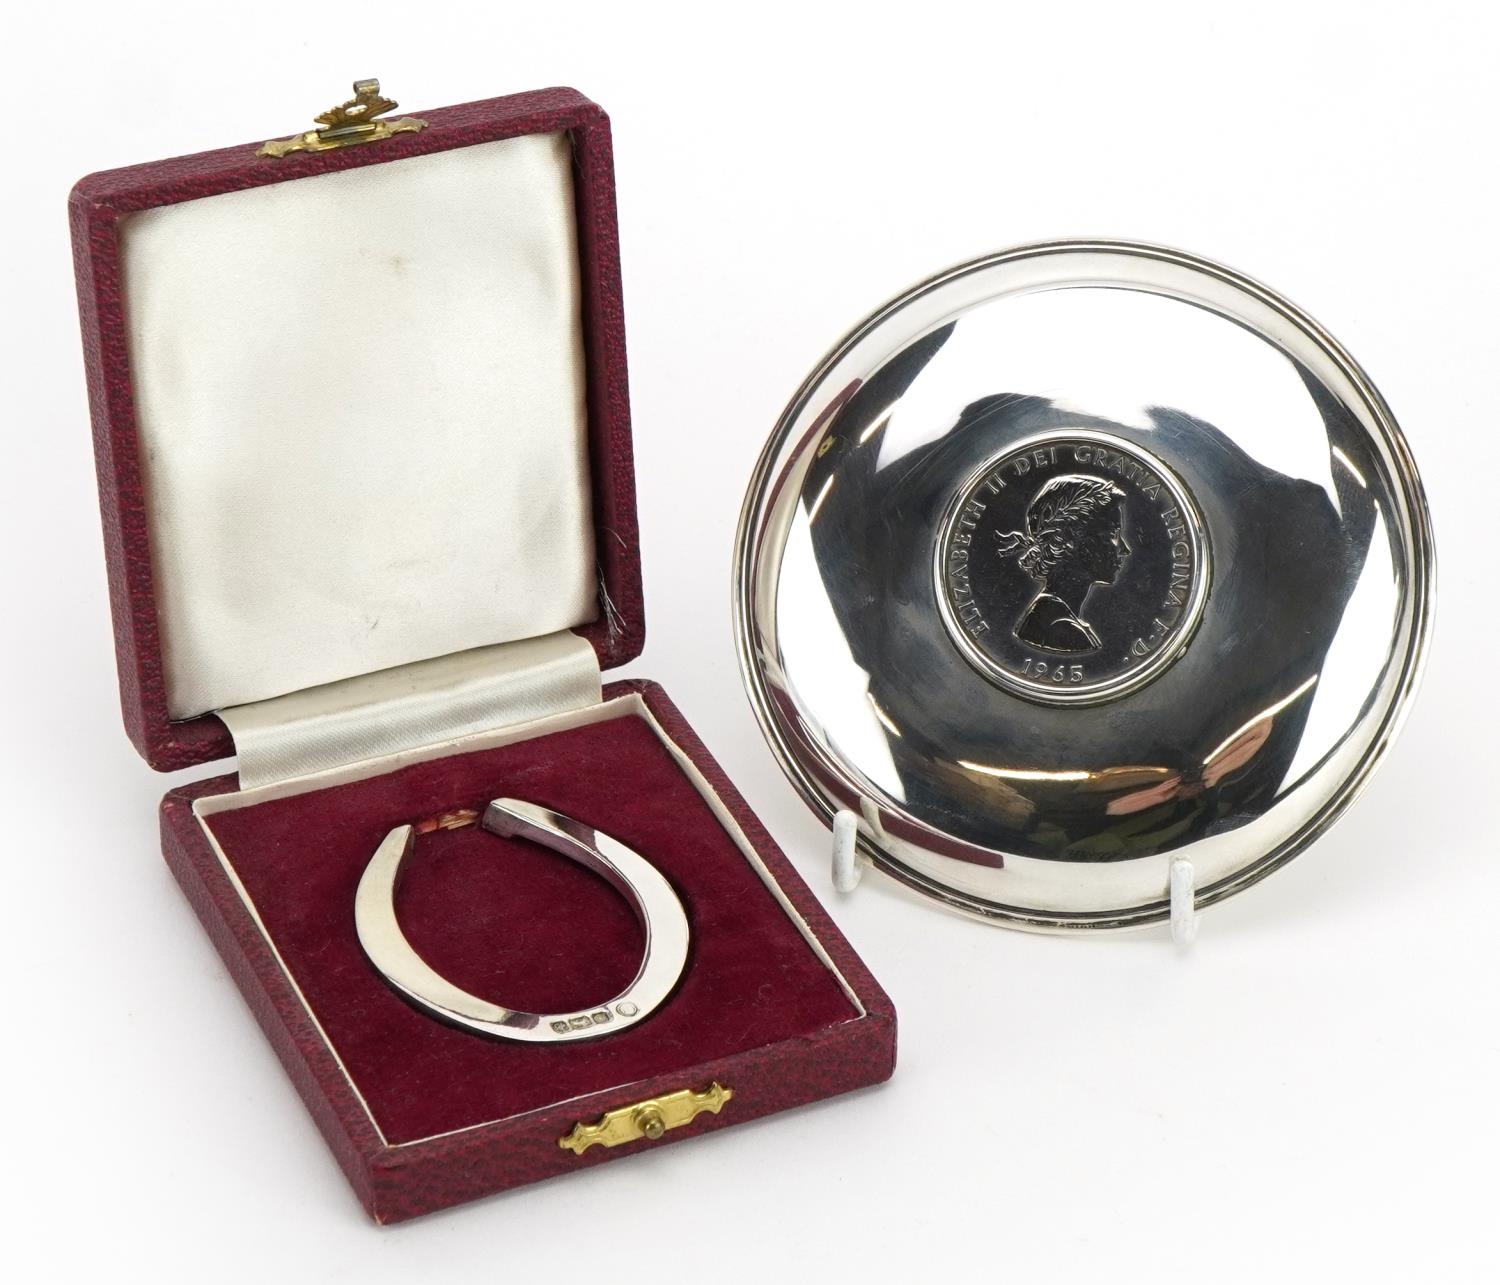 Circular silver commemorative dish set with a 1965 Churchill crown and a silver horseshoe napkin - Image 2 of 4